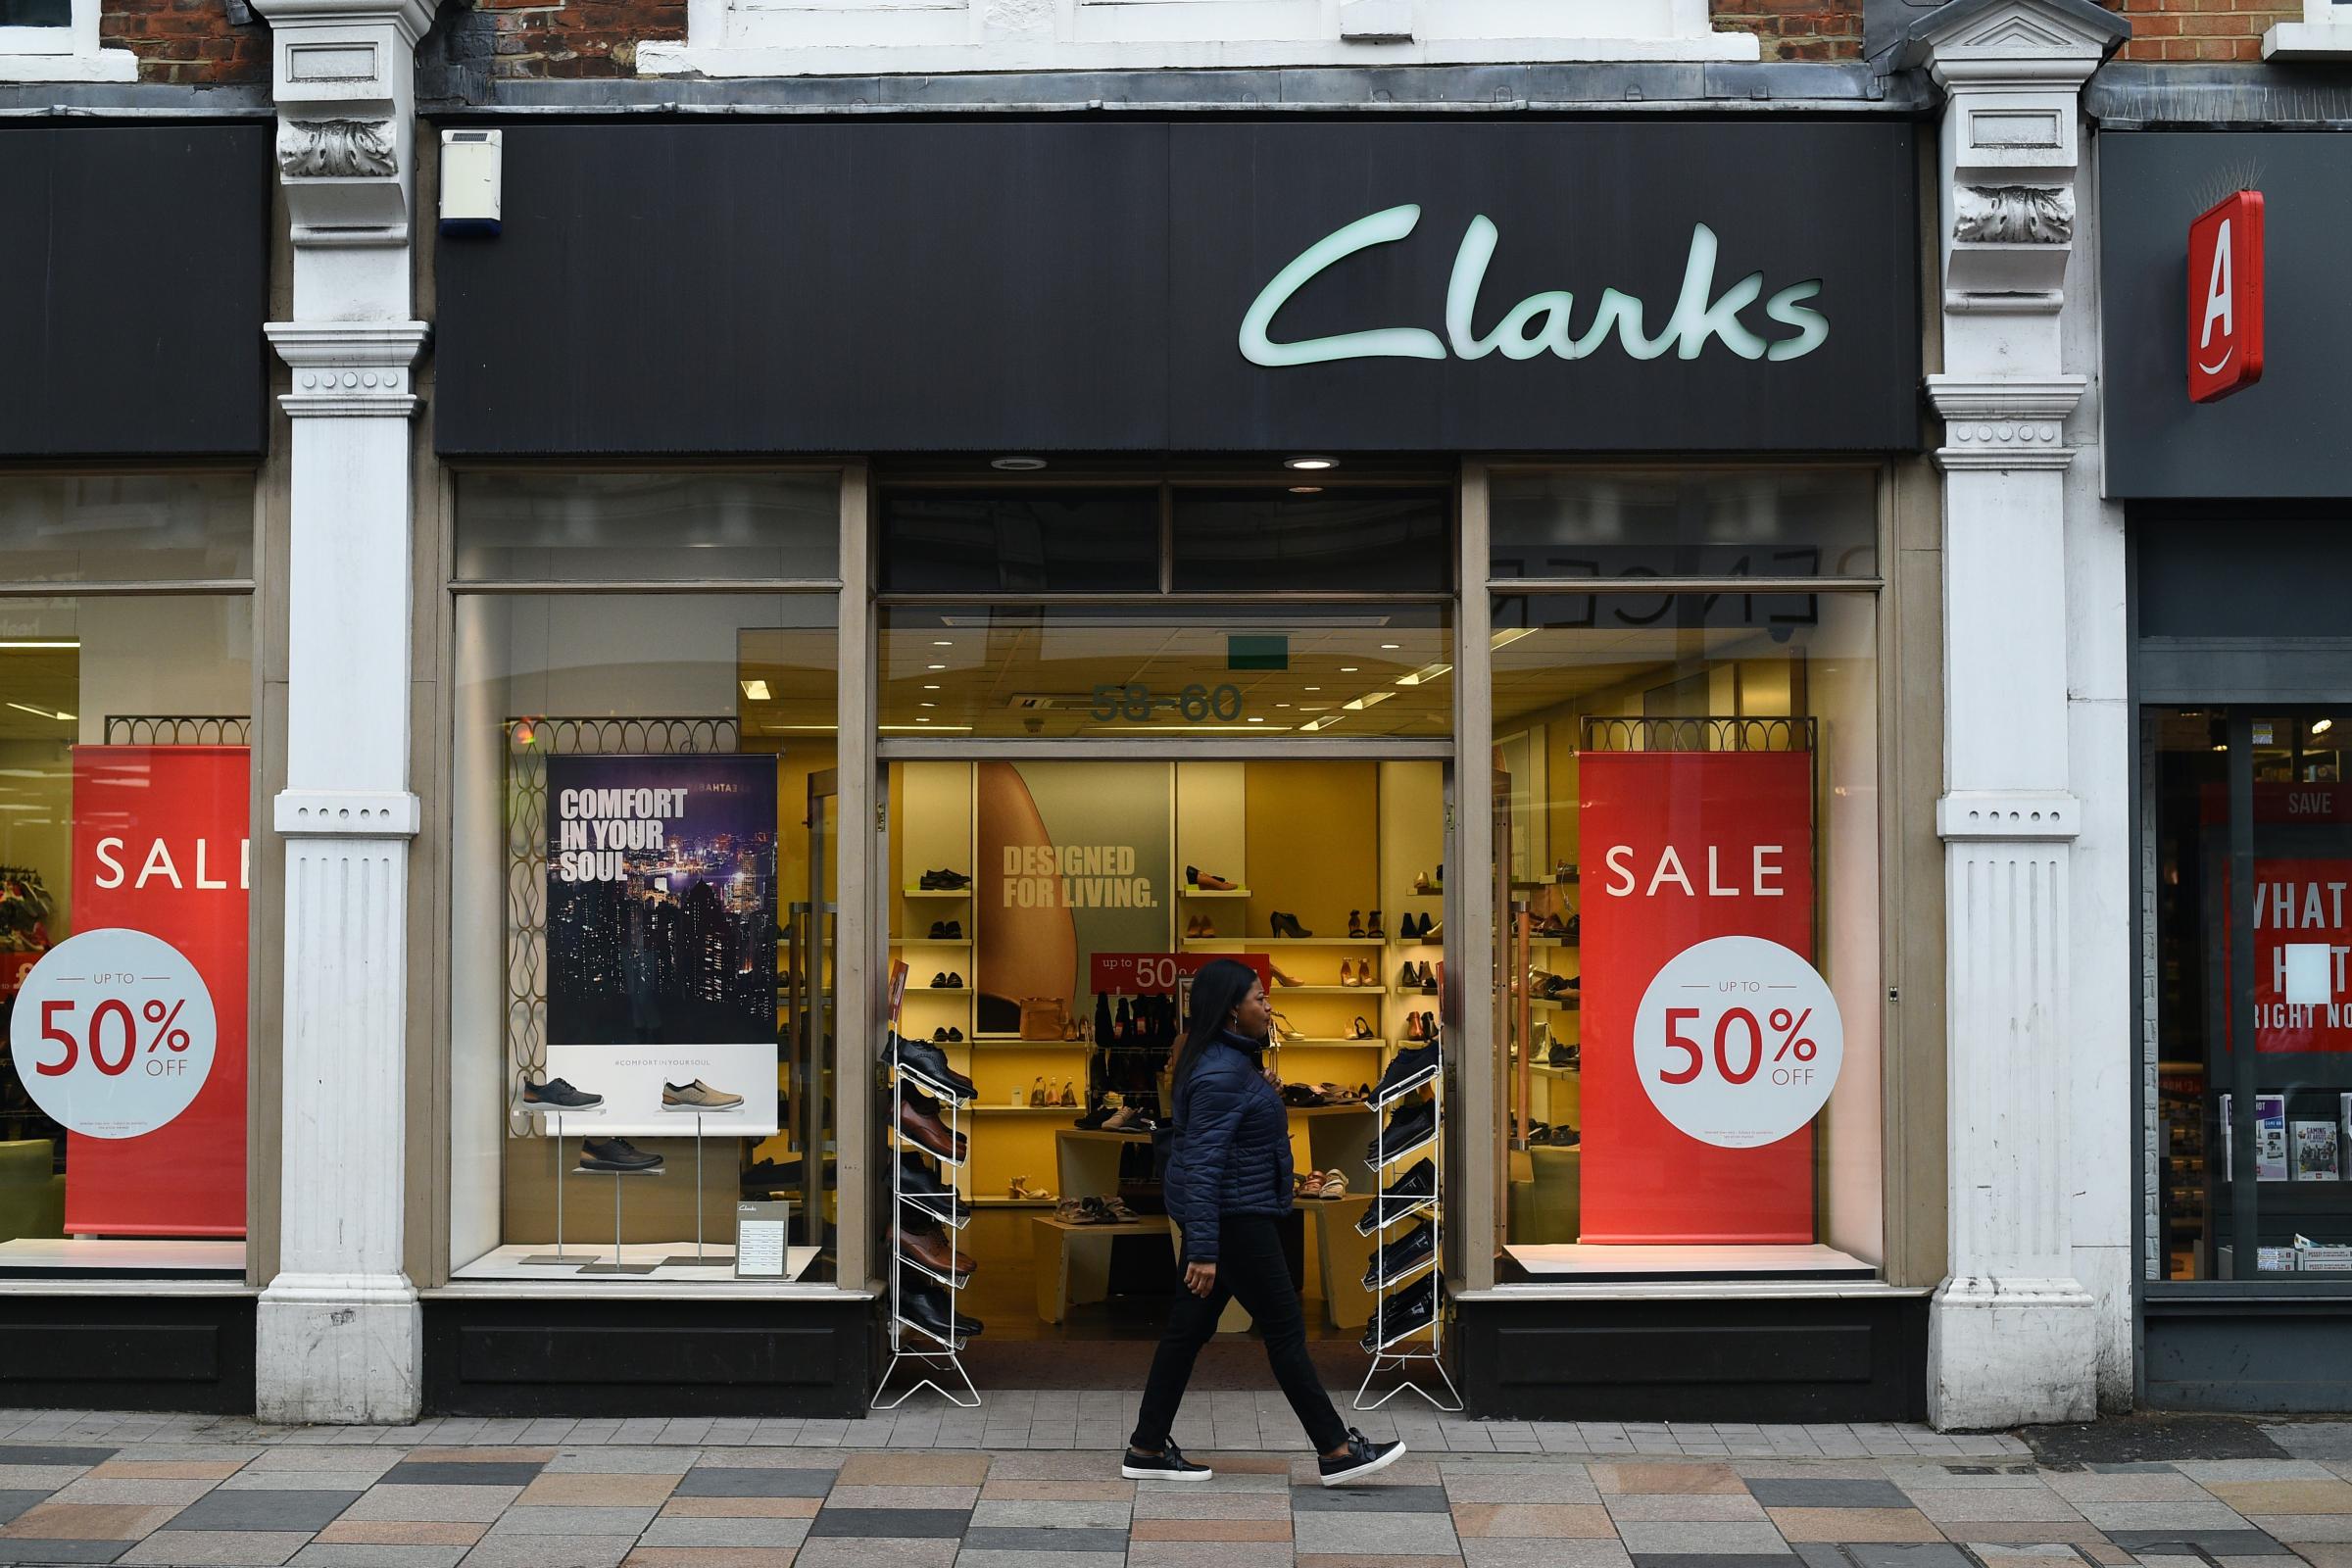 Clarks shoe chain rescued in £100m deal 